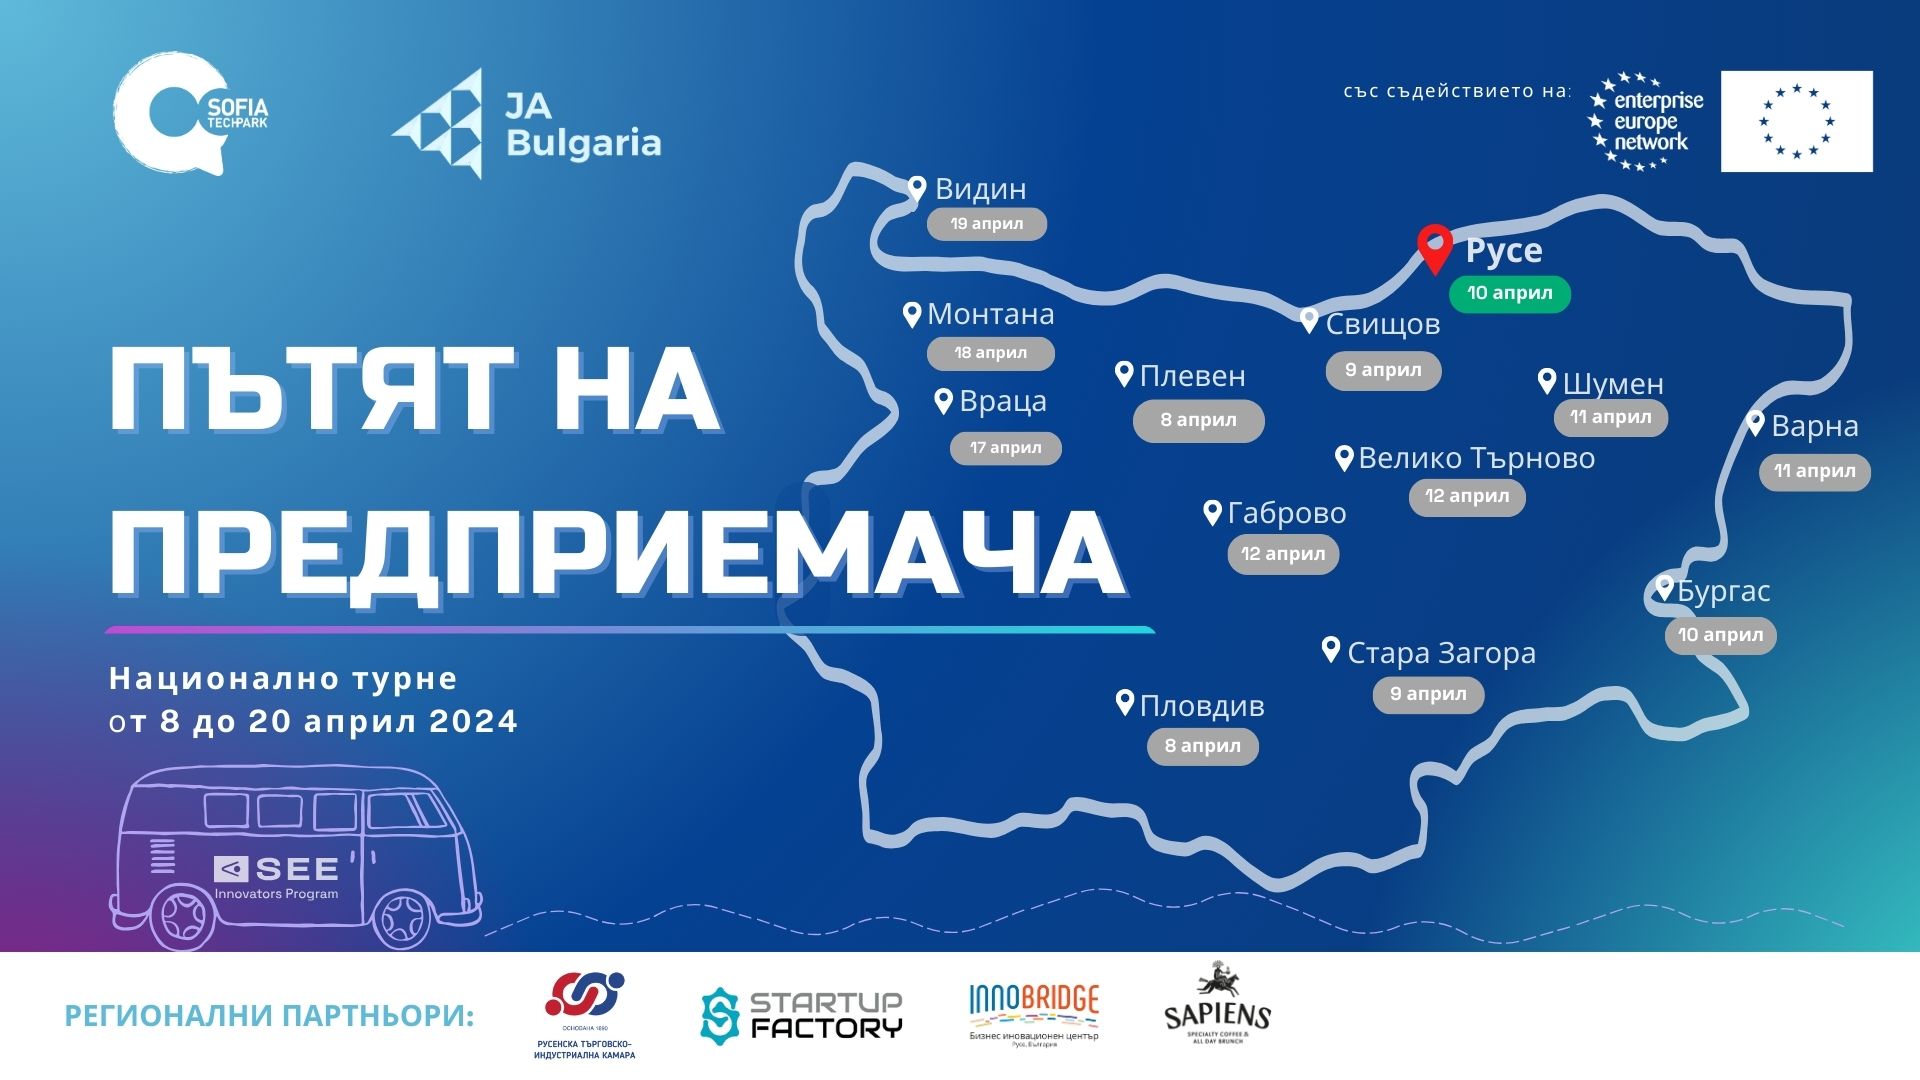 National information tour of Sofia Tech Park in Ruse The Entrepreneur's Path